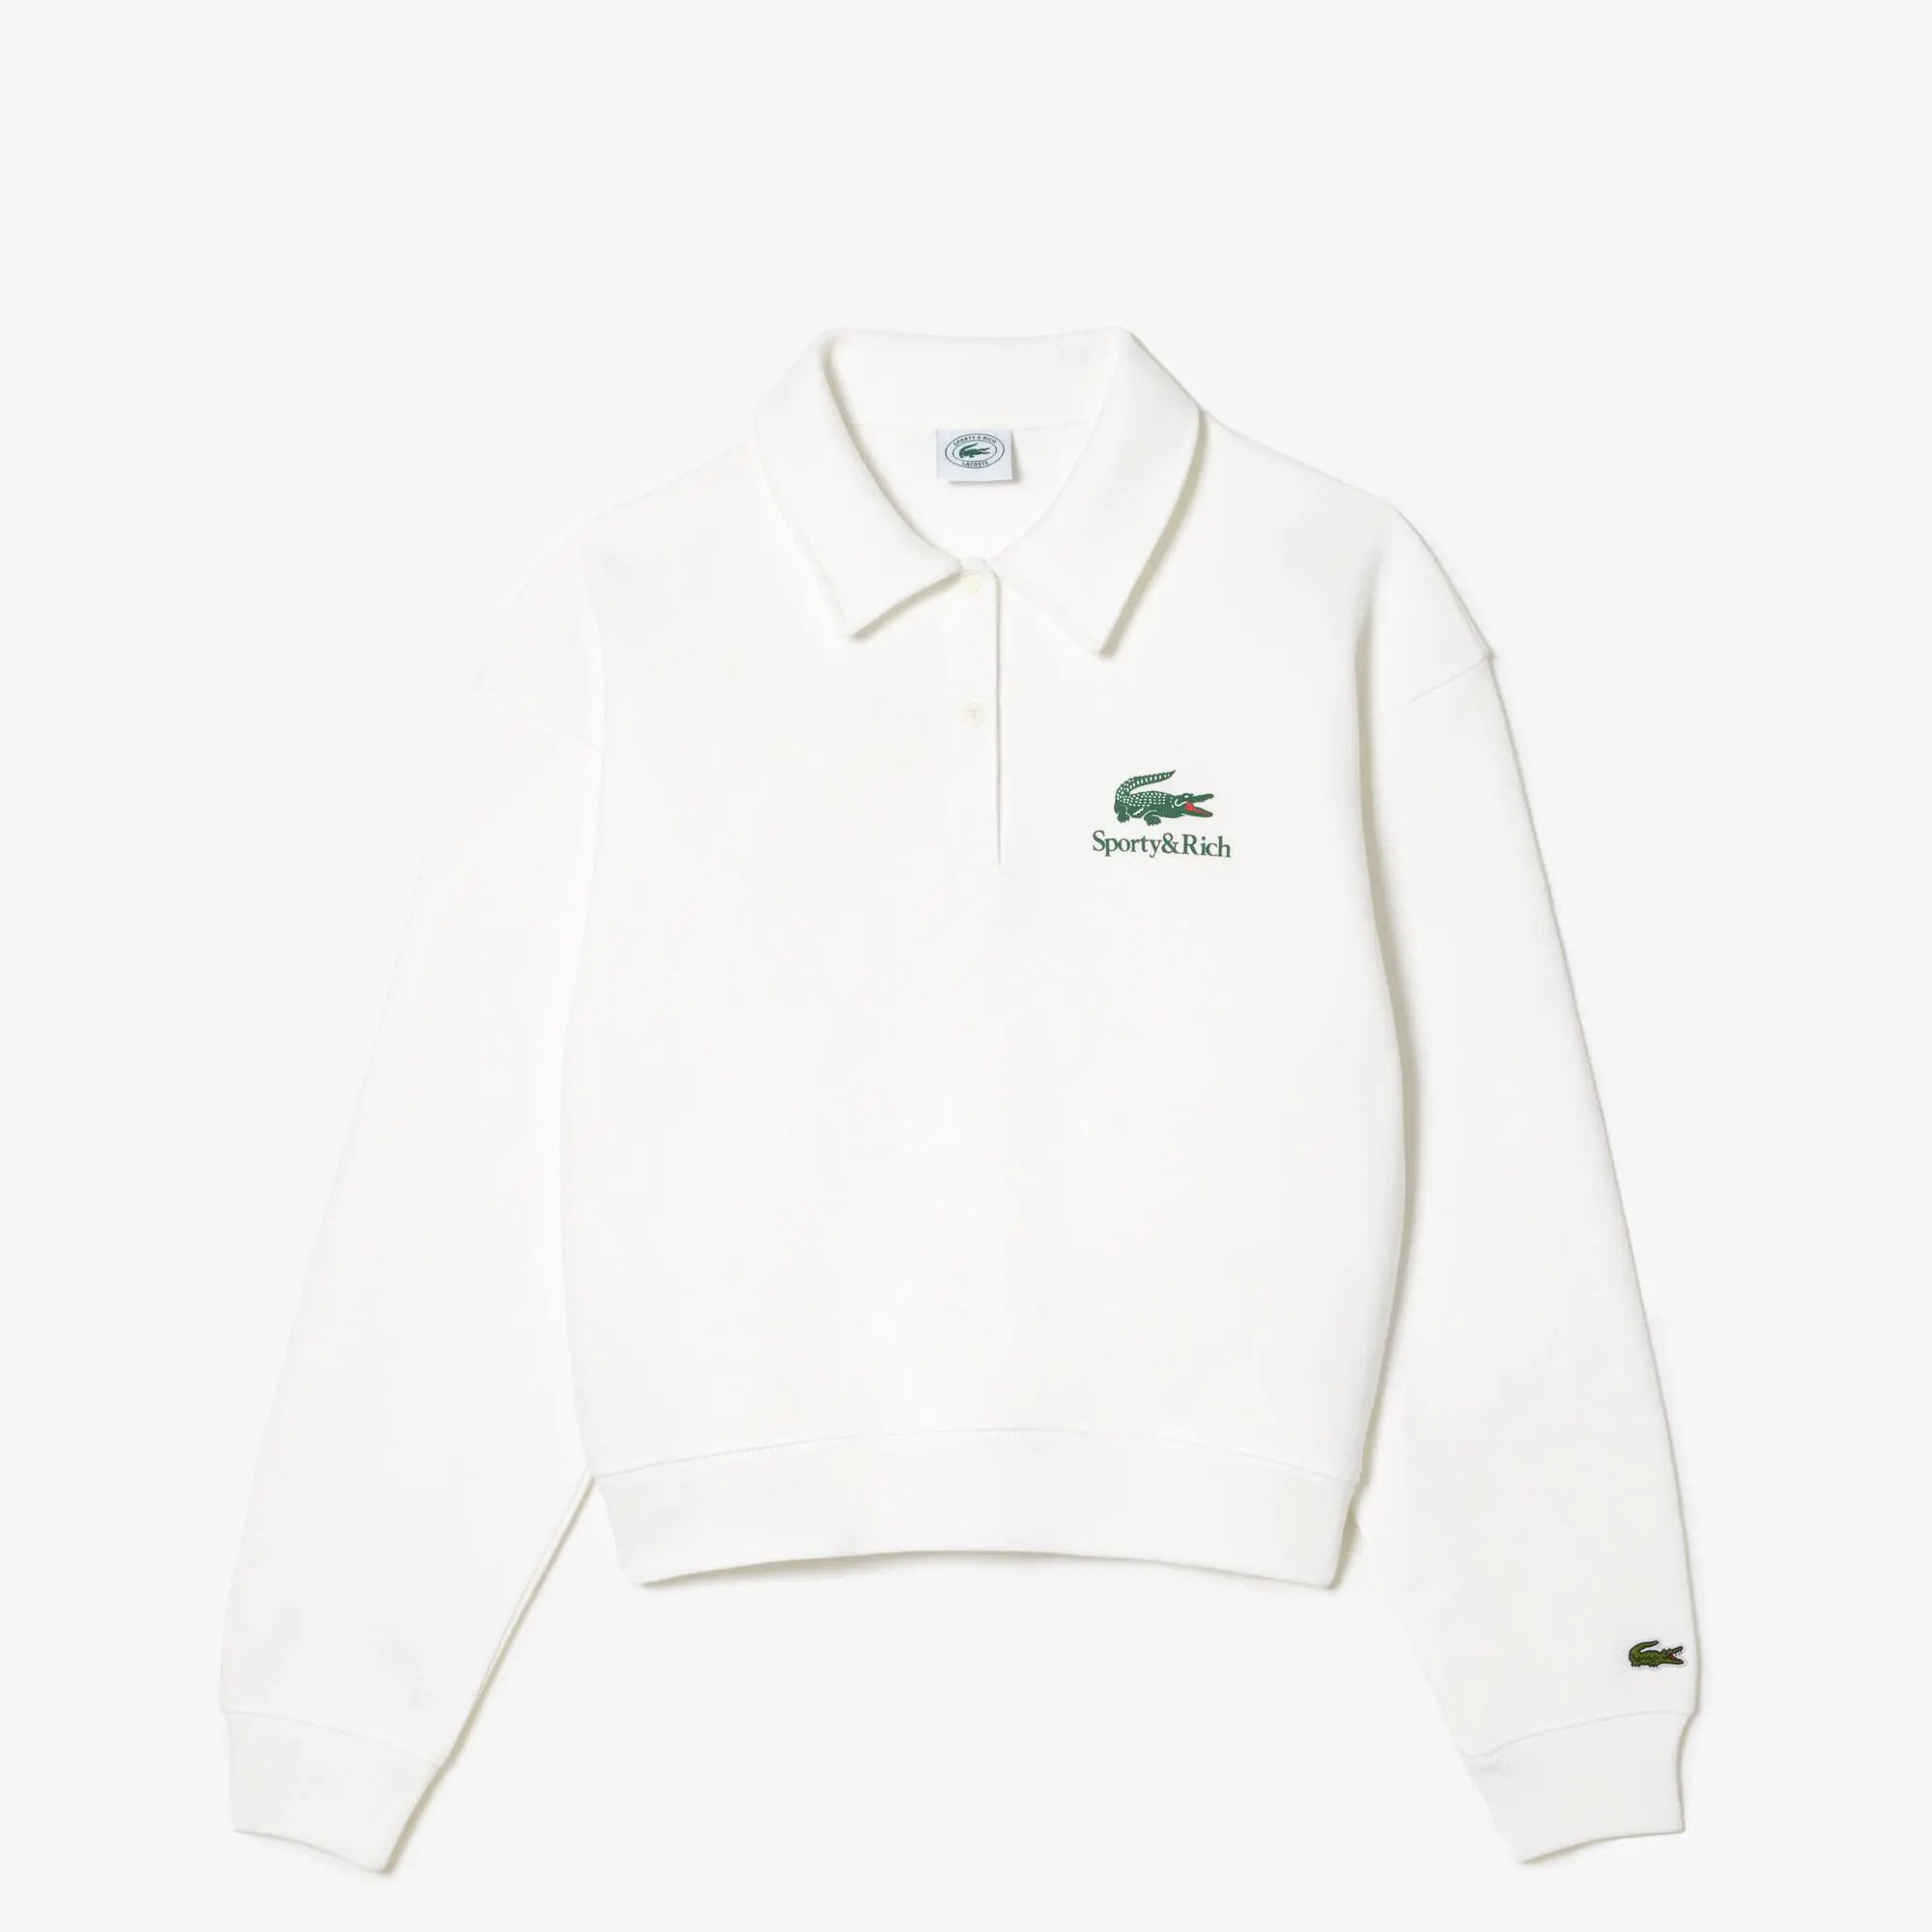 Lacoste Long Sleeve Lacoste x Sporty & Rich Polo Shirt. 2